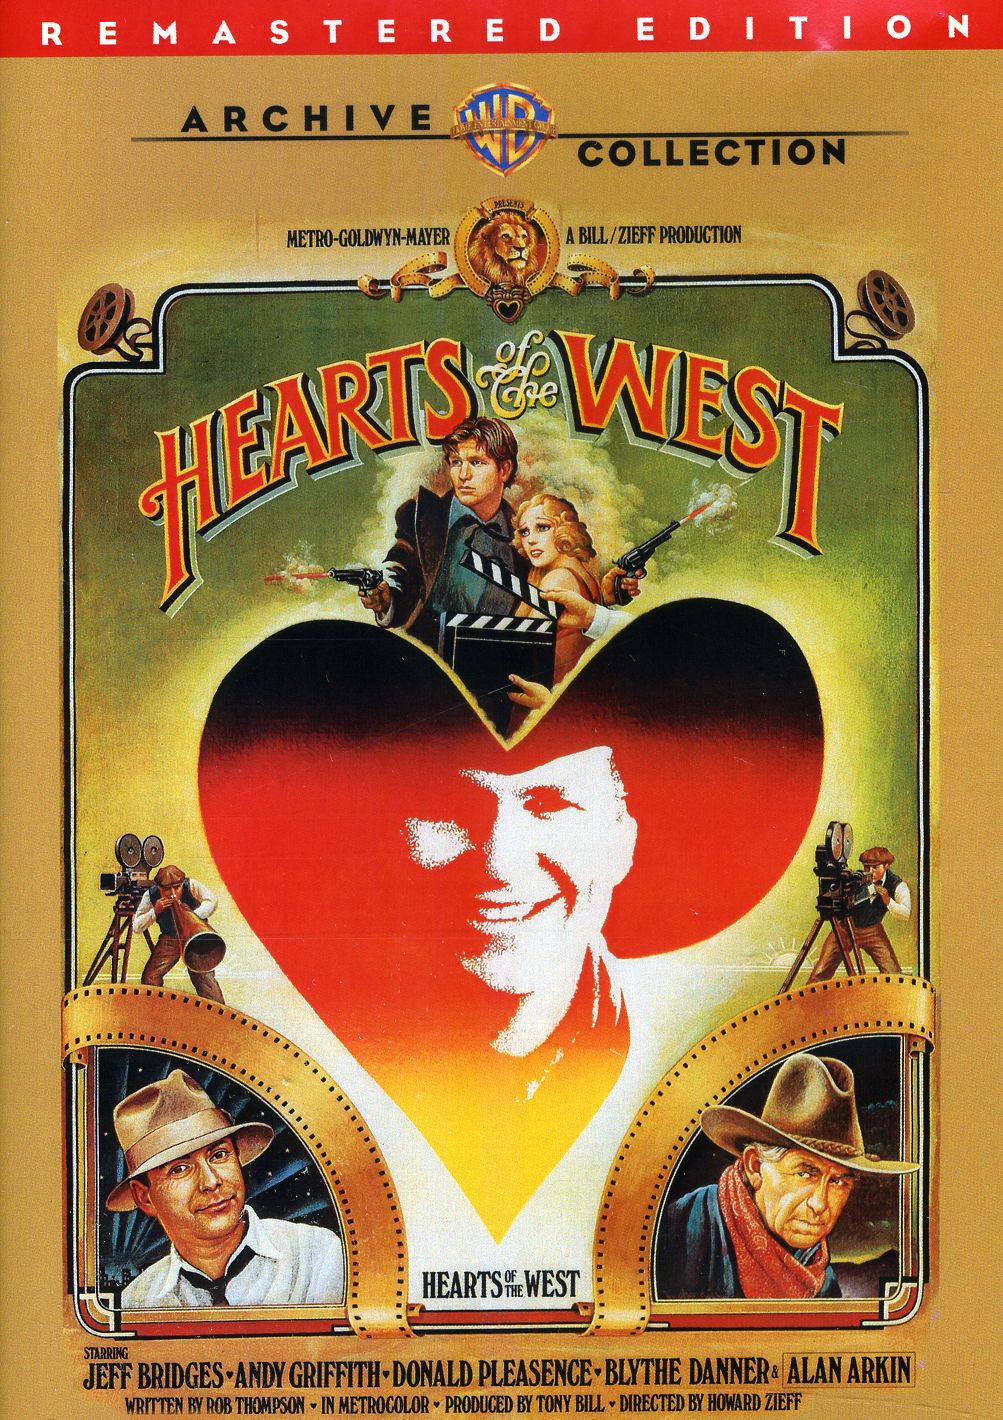 HEARTS OF THE WEST / (MOD RMST)